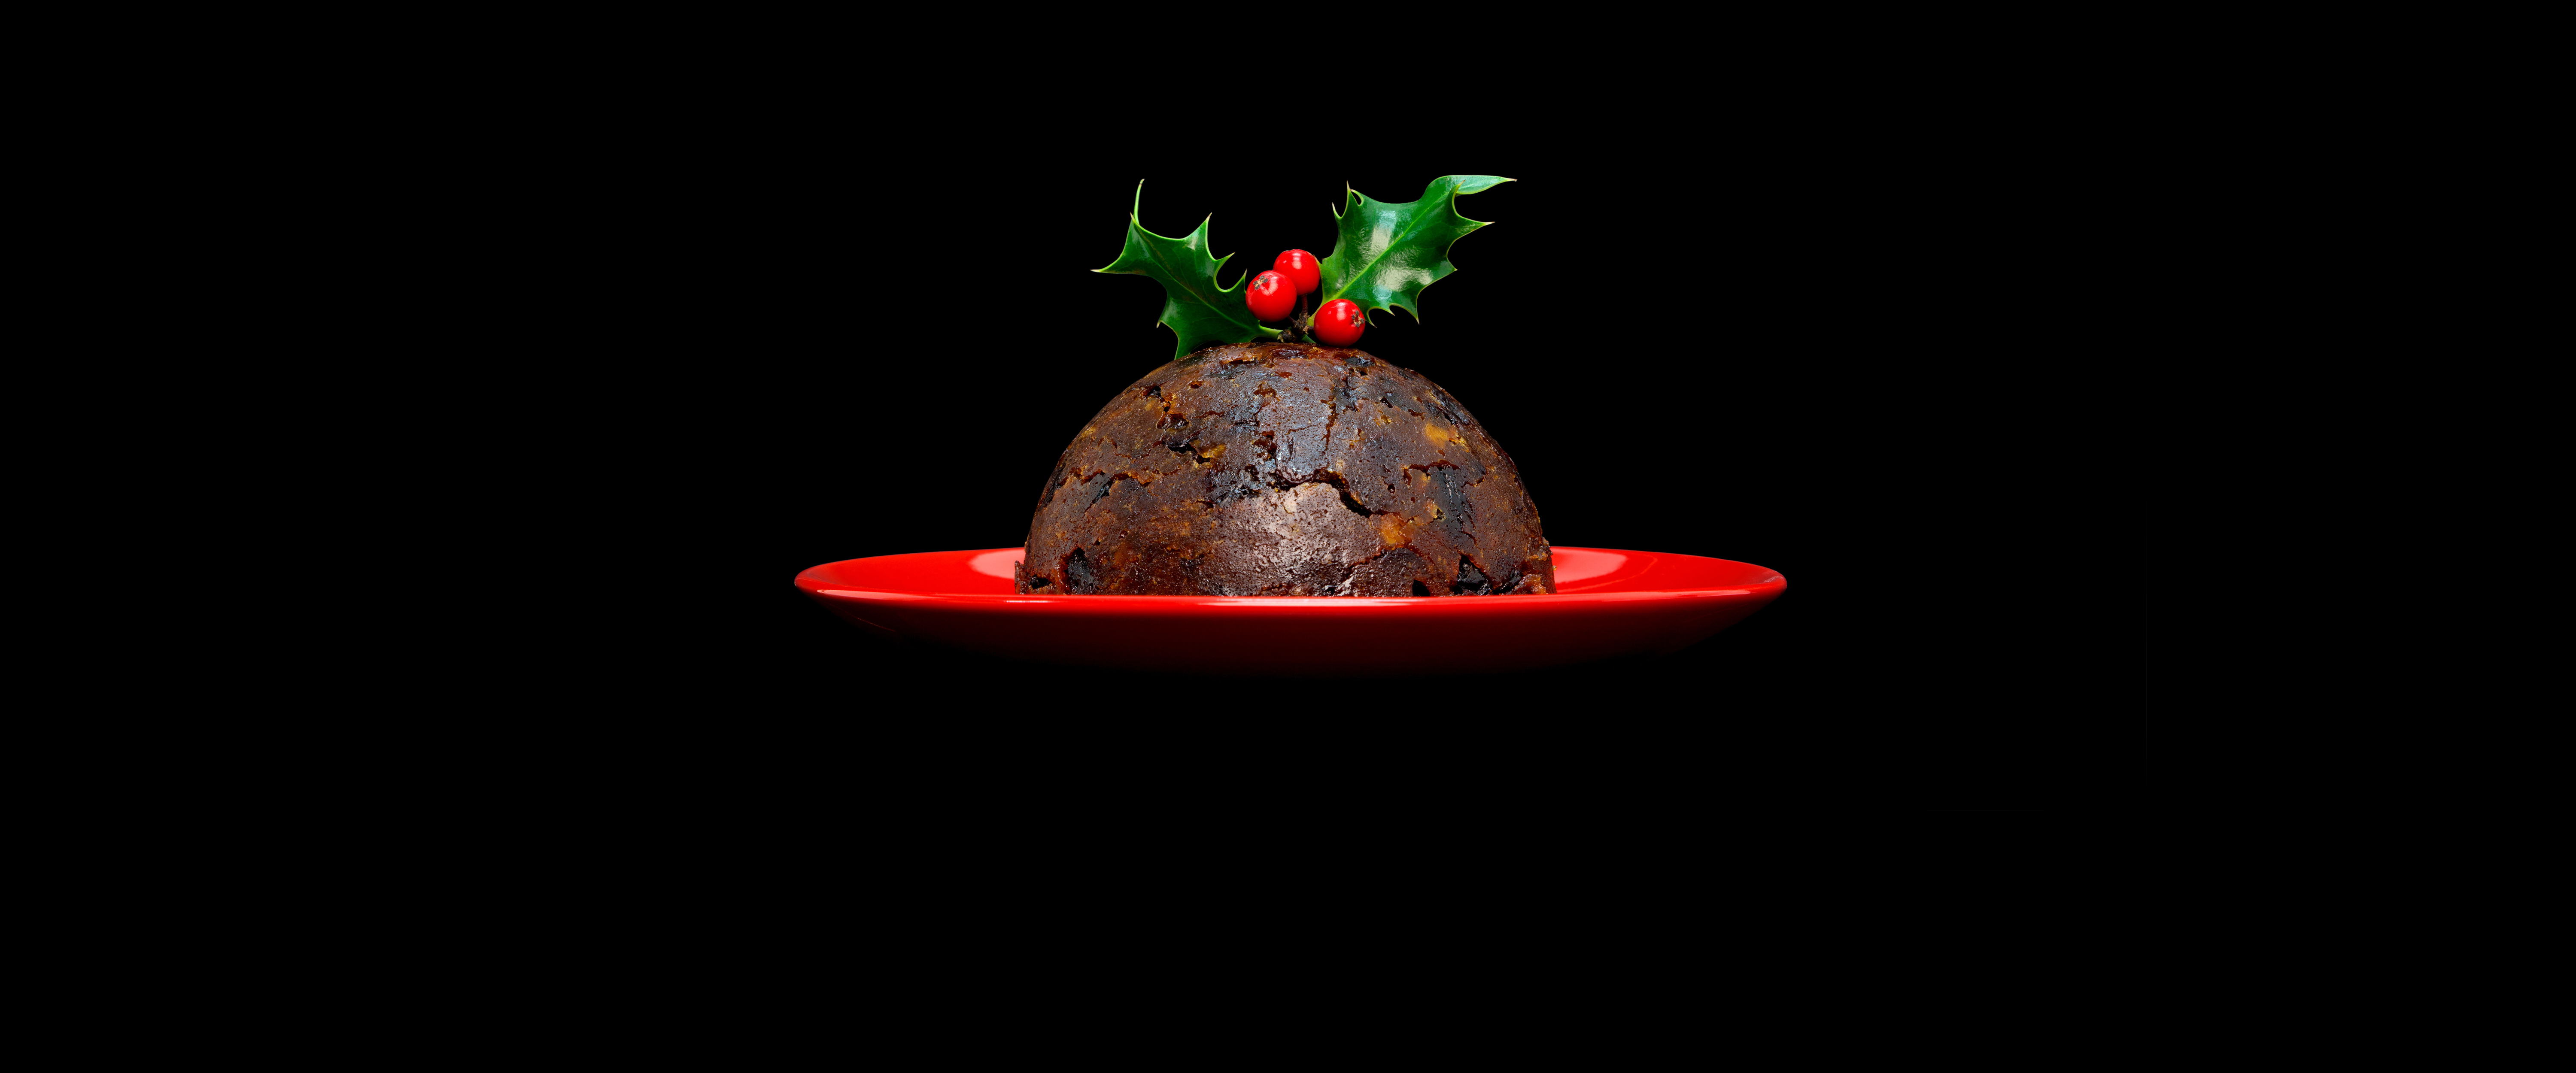 Bring us some figgy pudding.